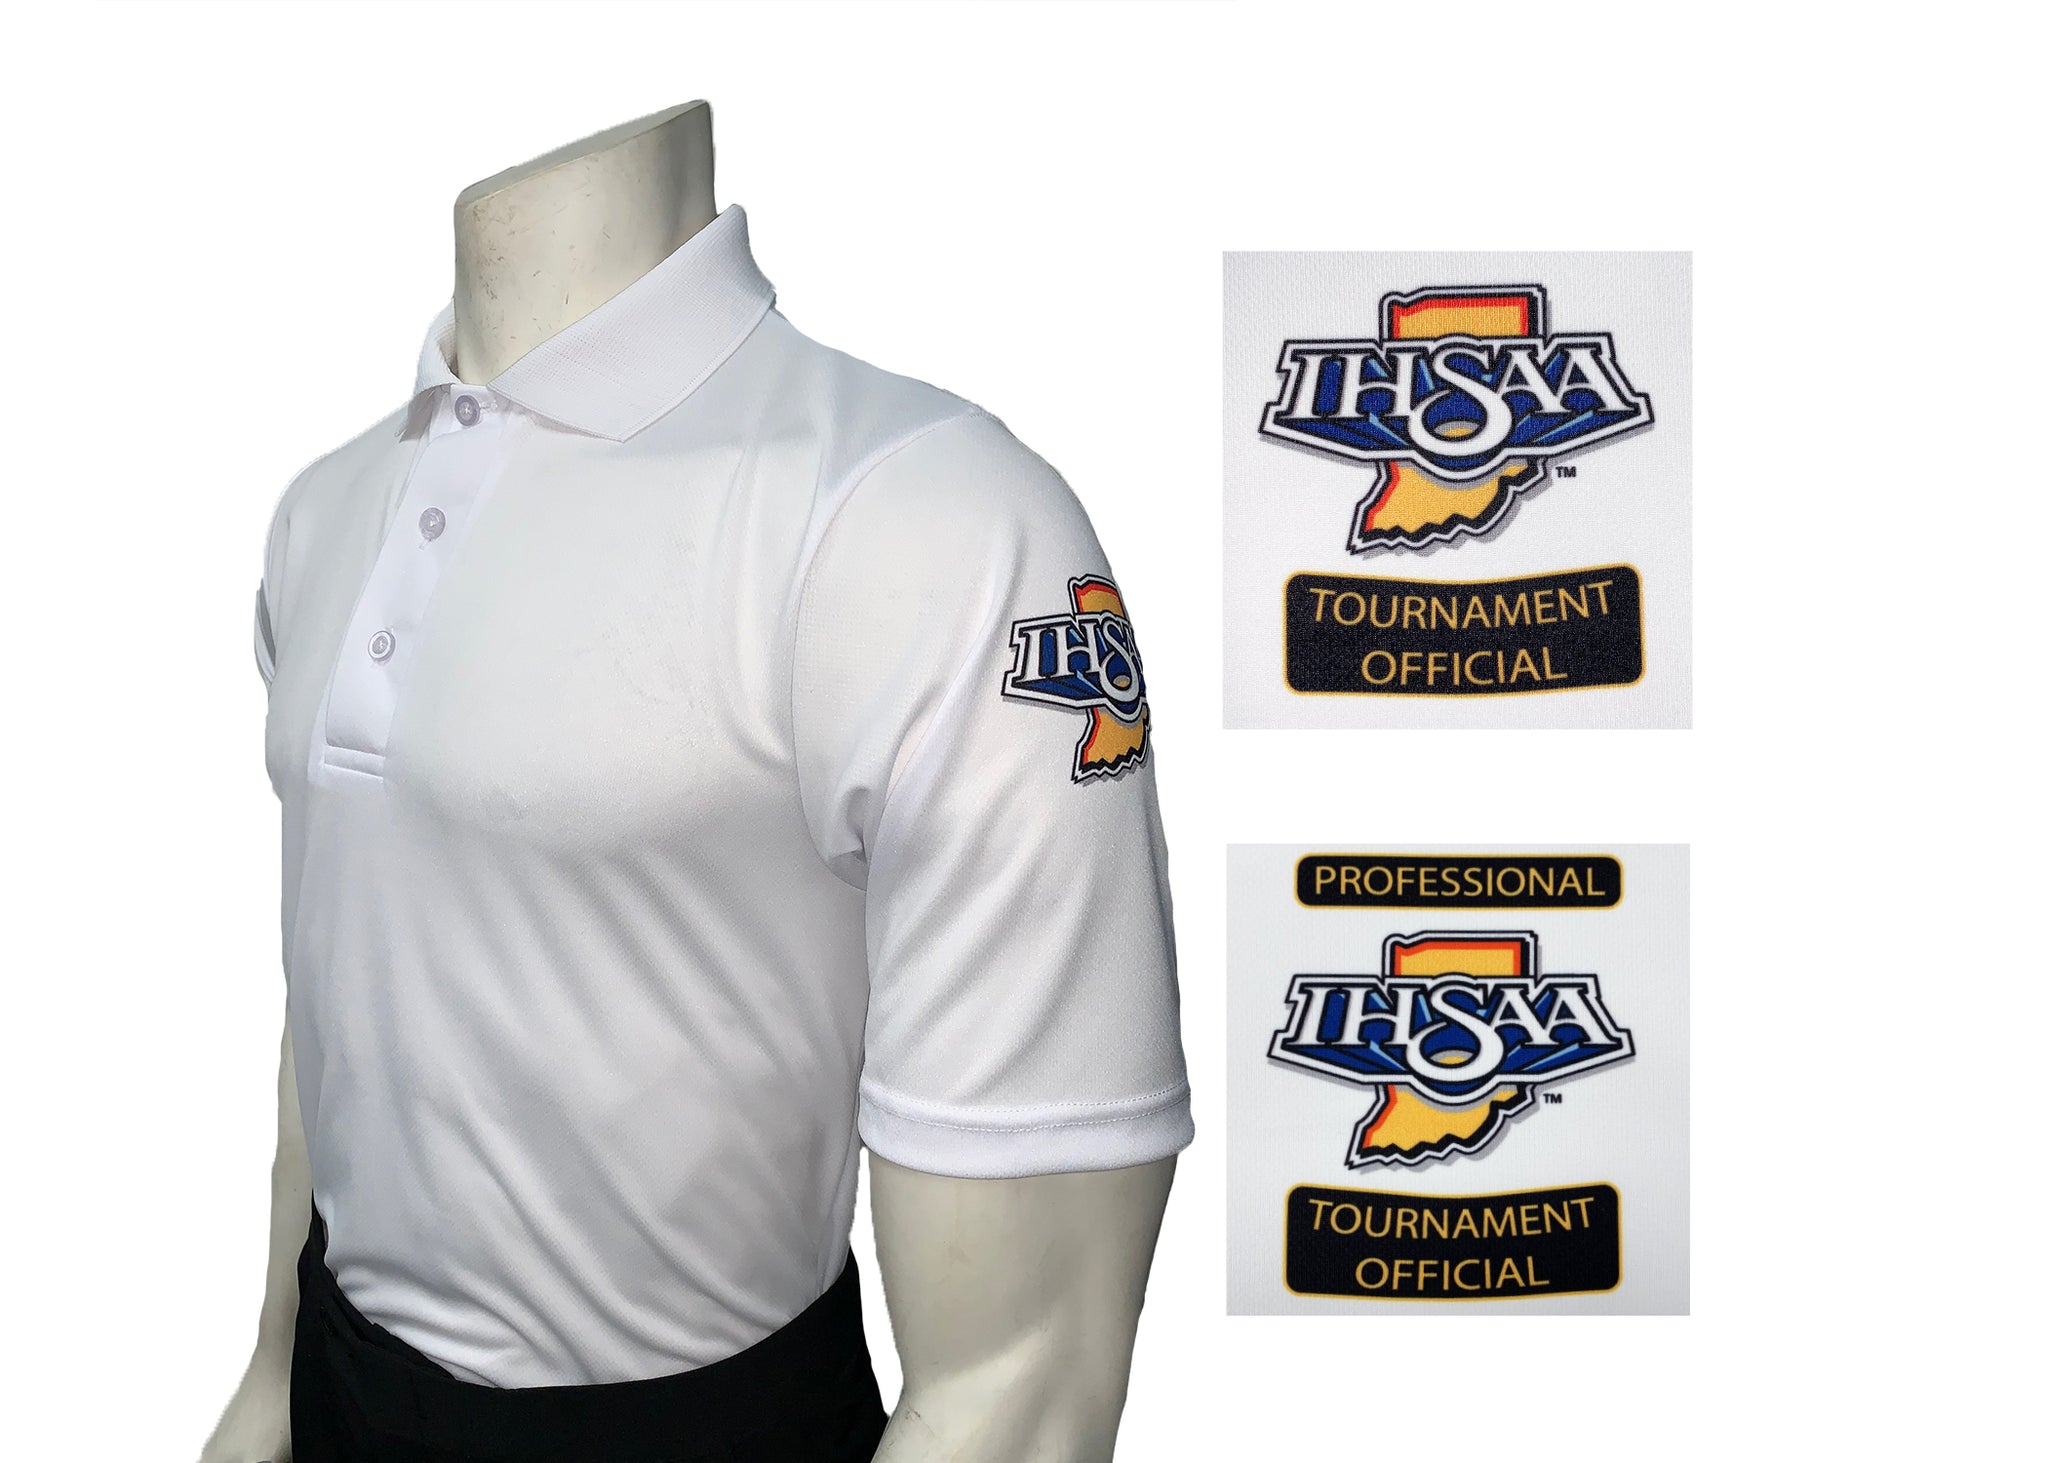 USA400IN - Smitty "Made in USA" - IHSAA Men's Short Sleeve WHITE Volleyball and Swimming  Shirt